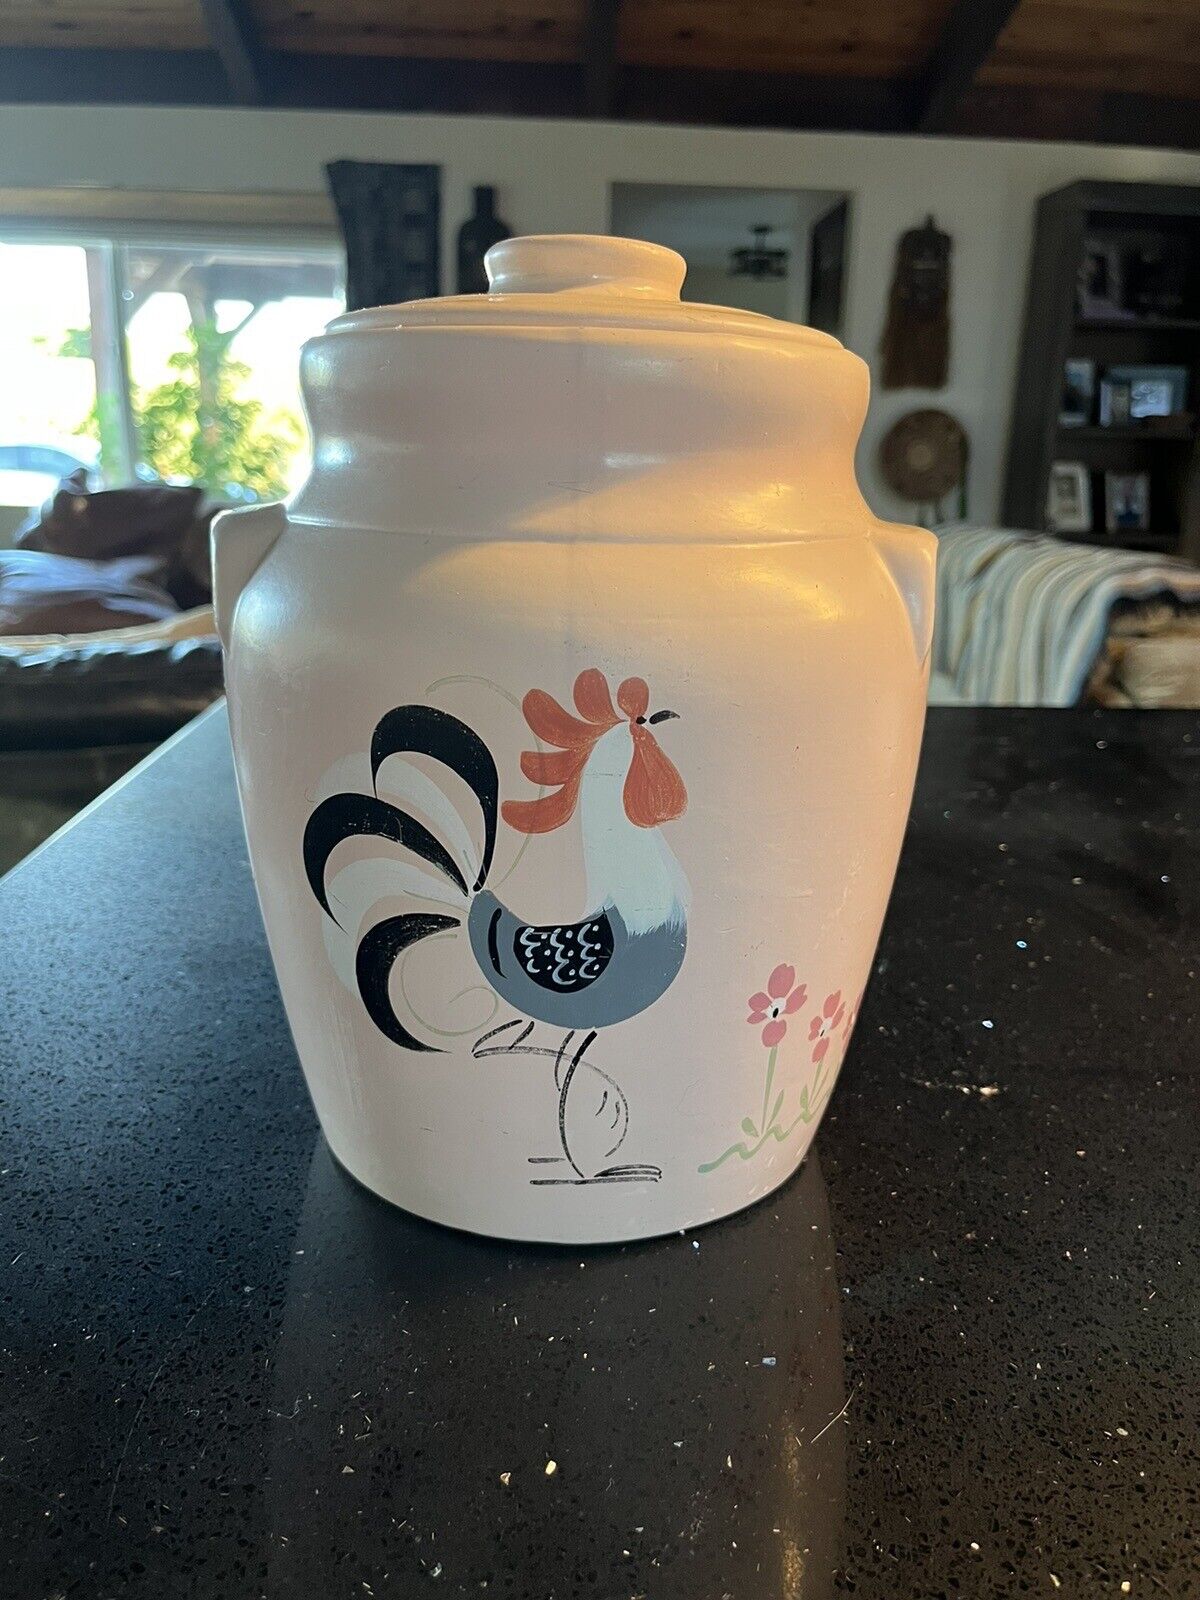 Arthur J. Ransburg 1940's 10”x8”Stoneware hand-painted Rooster jar.